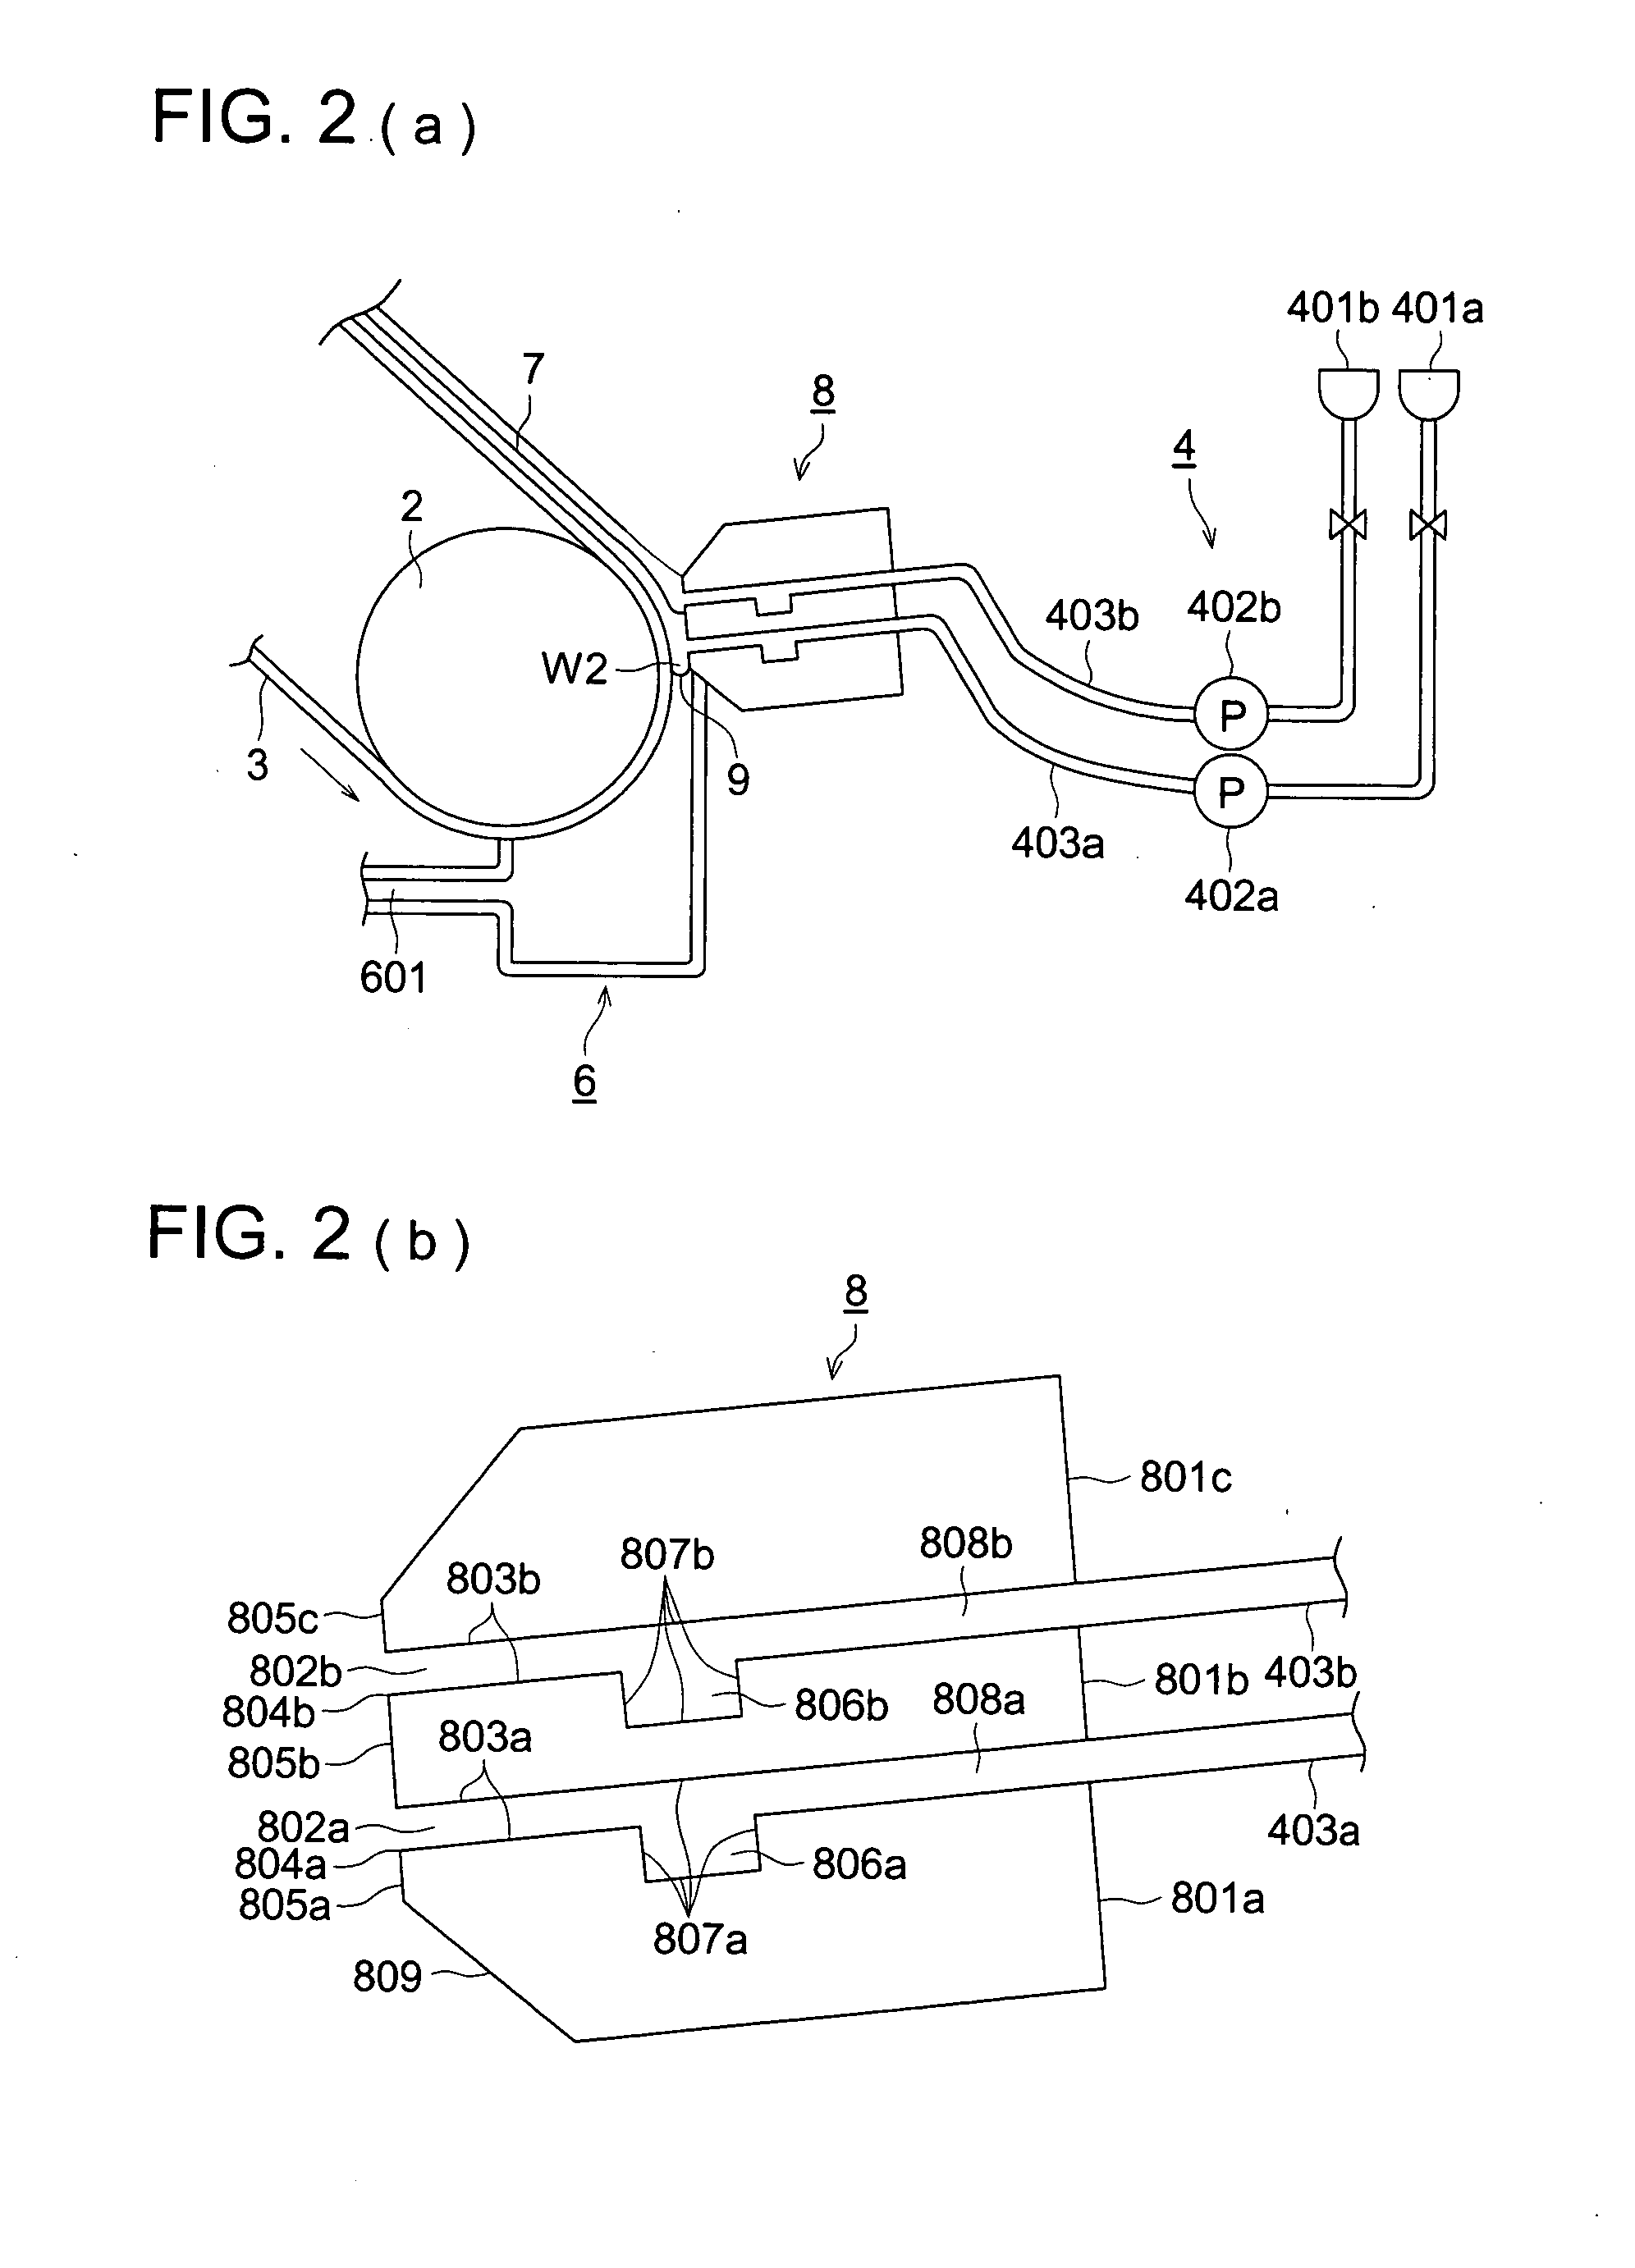 Producing method for die coater and coating apparatus